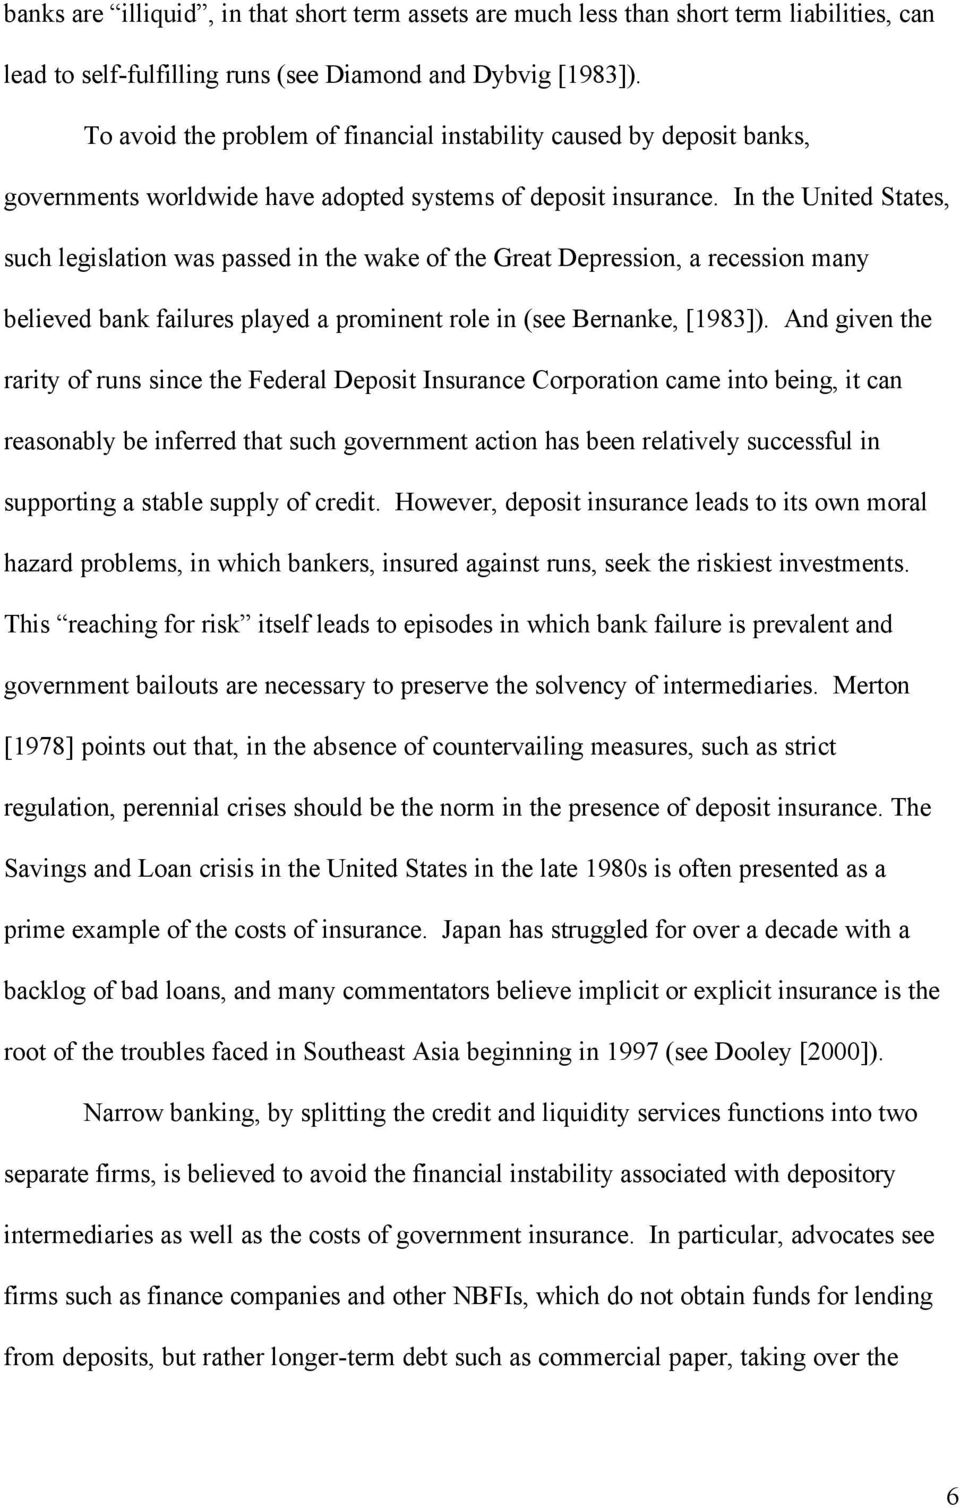 In the United States, such legislation was passed in the wake of the Great Depression, a recession many believed bank failures played a prominent role in (see Bernanke, [1983]).